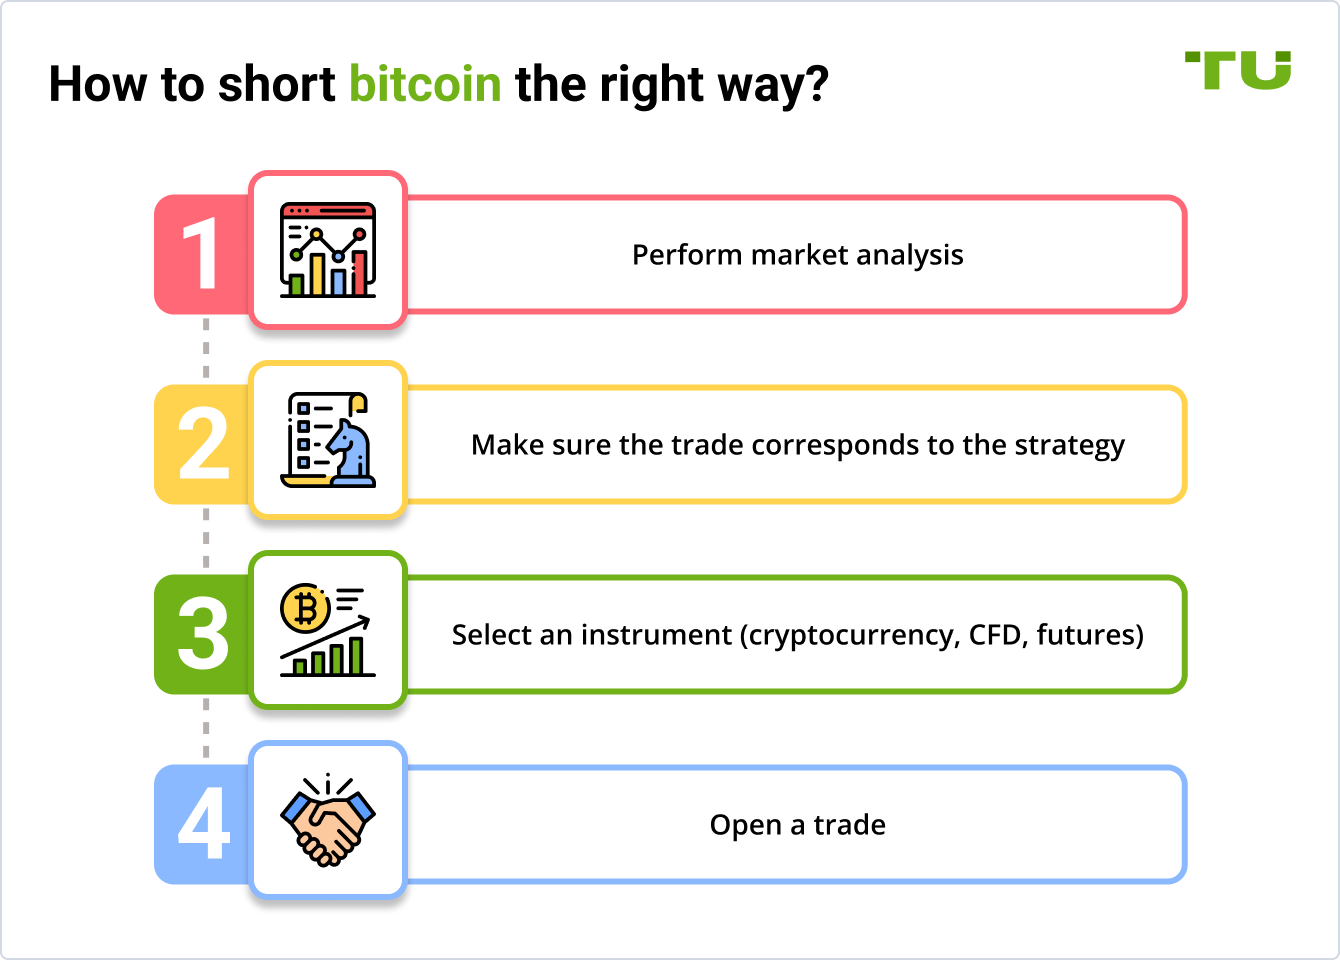 How to short bitcoin the right way?